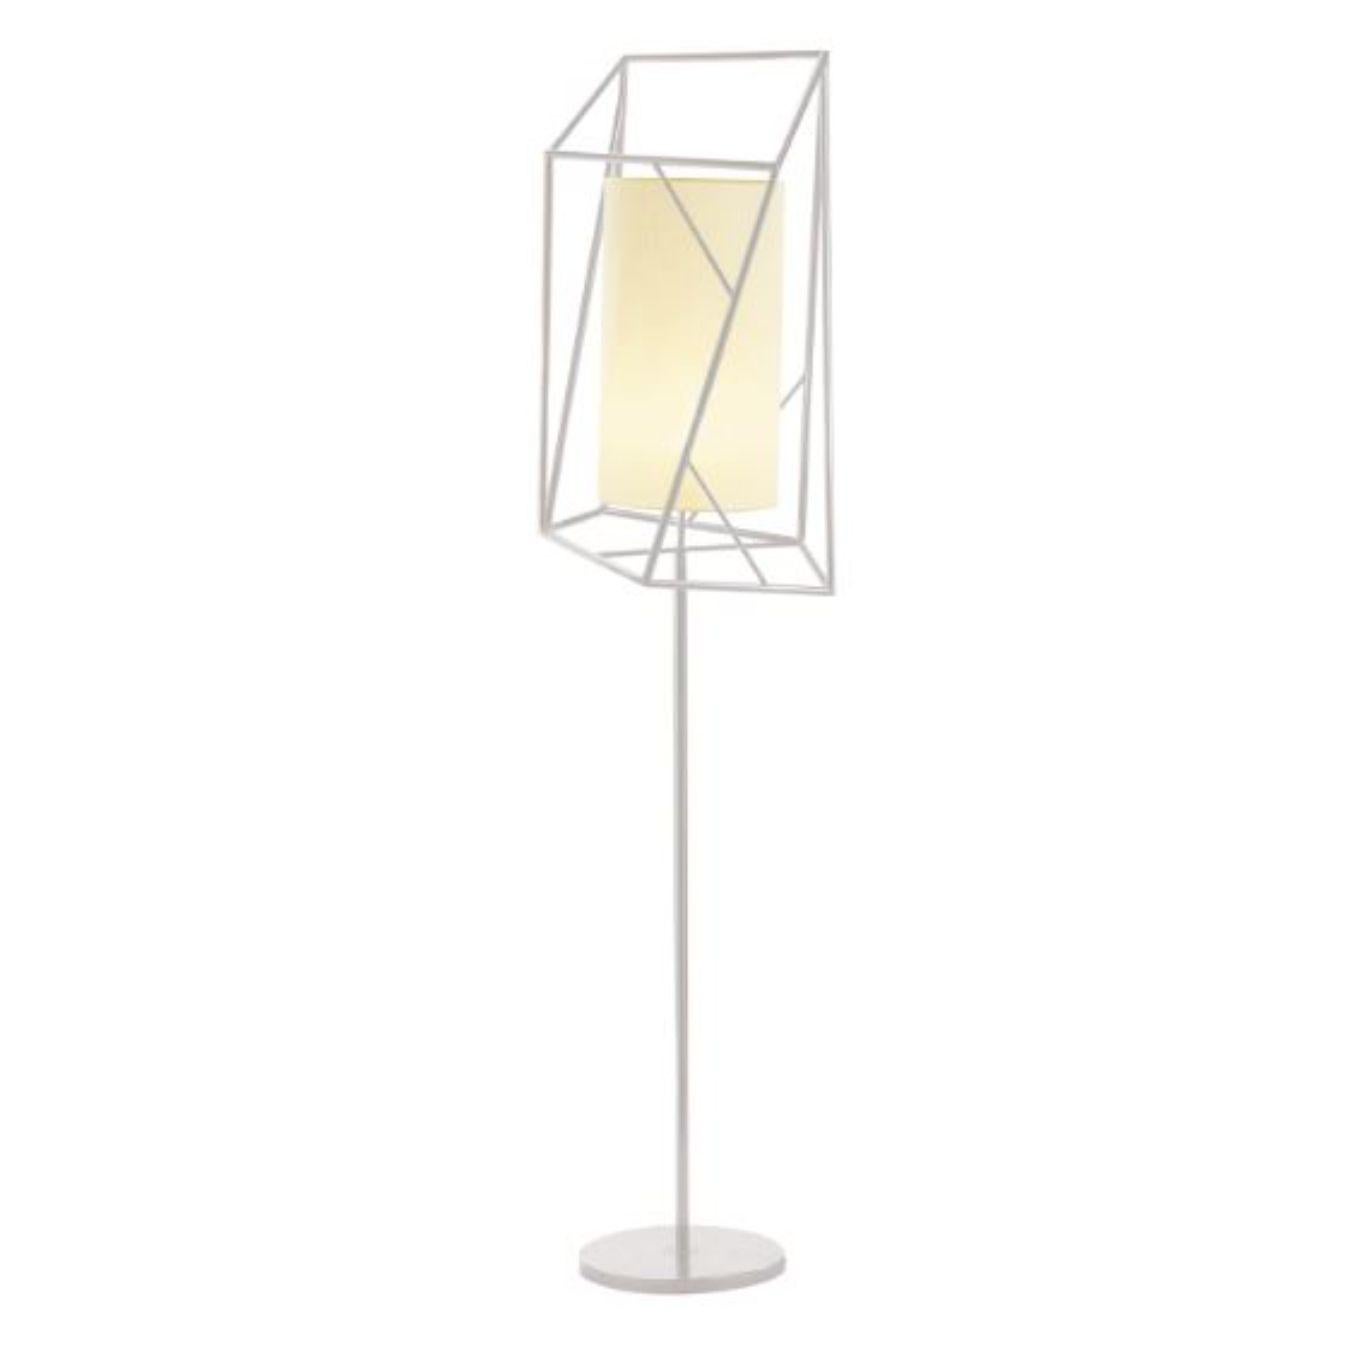 Taupe star floor lamp by Dooq.
Dimensions: W 45 x D 45 x H 170 cm
Materials: lacquered metal, polished or satin metal.
Abat-jour: linen
Also available in different colors and materials.

Information:
230V/50Hz
E27/1x20W